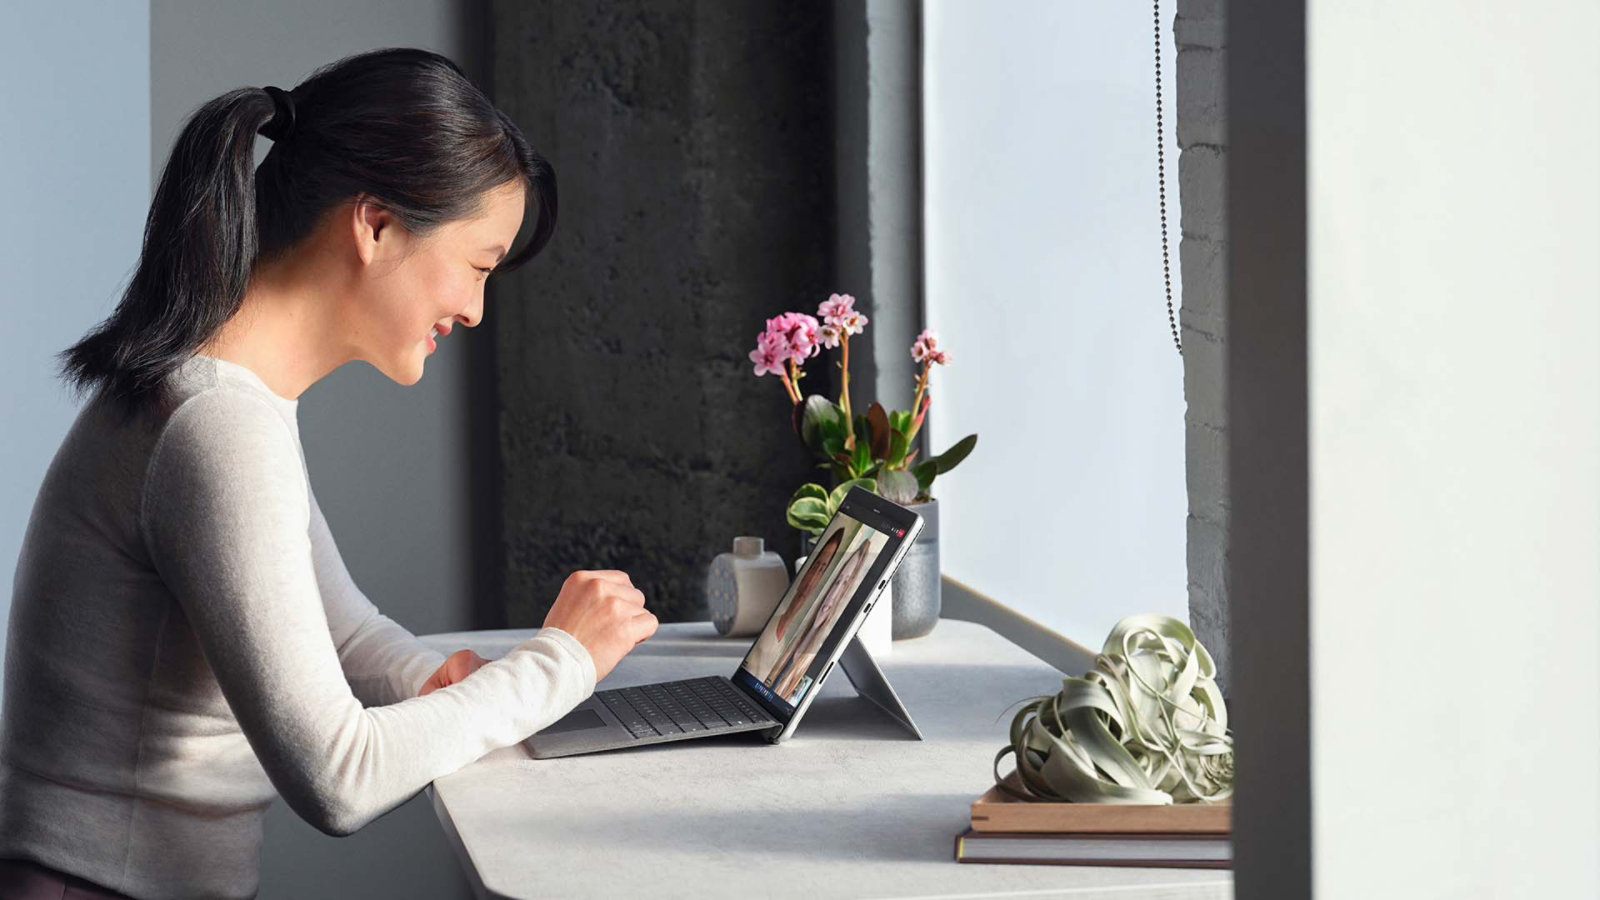 A person is observed taking a Microsoft Teams call from a Surface Pro 8 device in a remote work setting